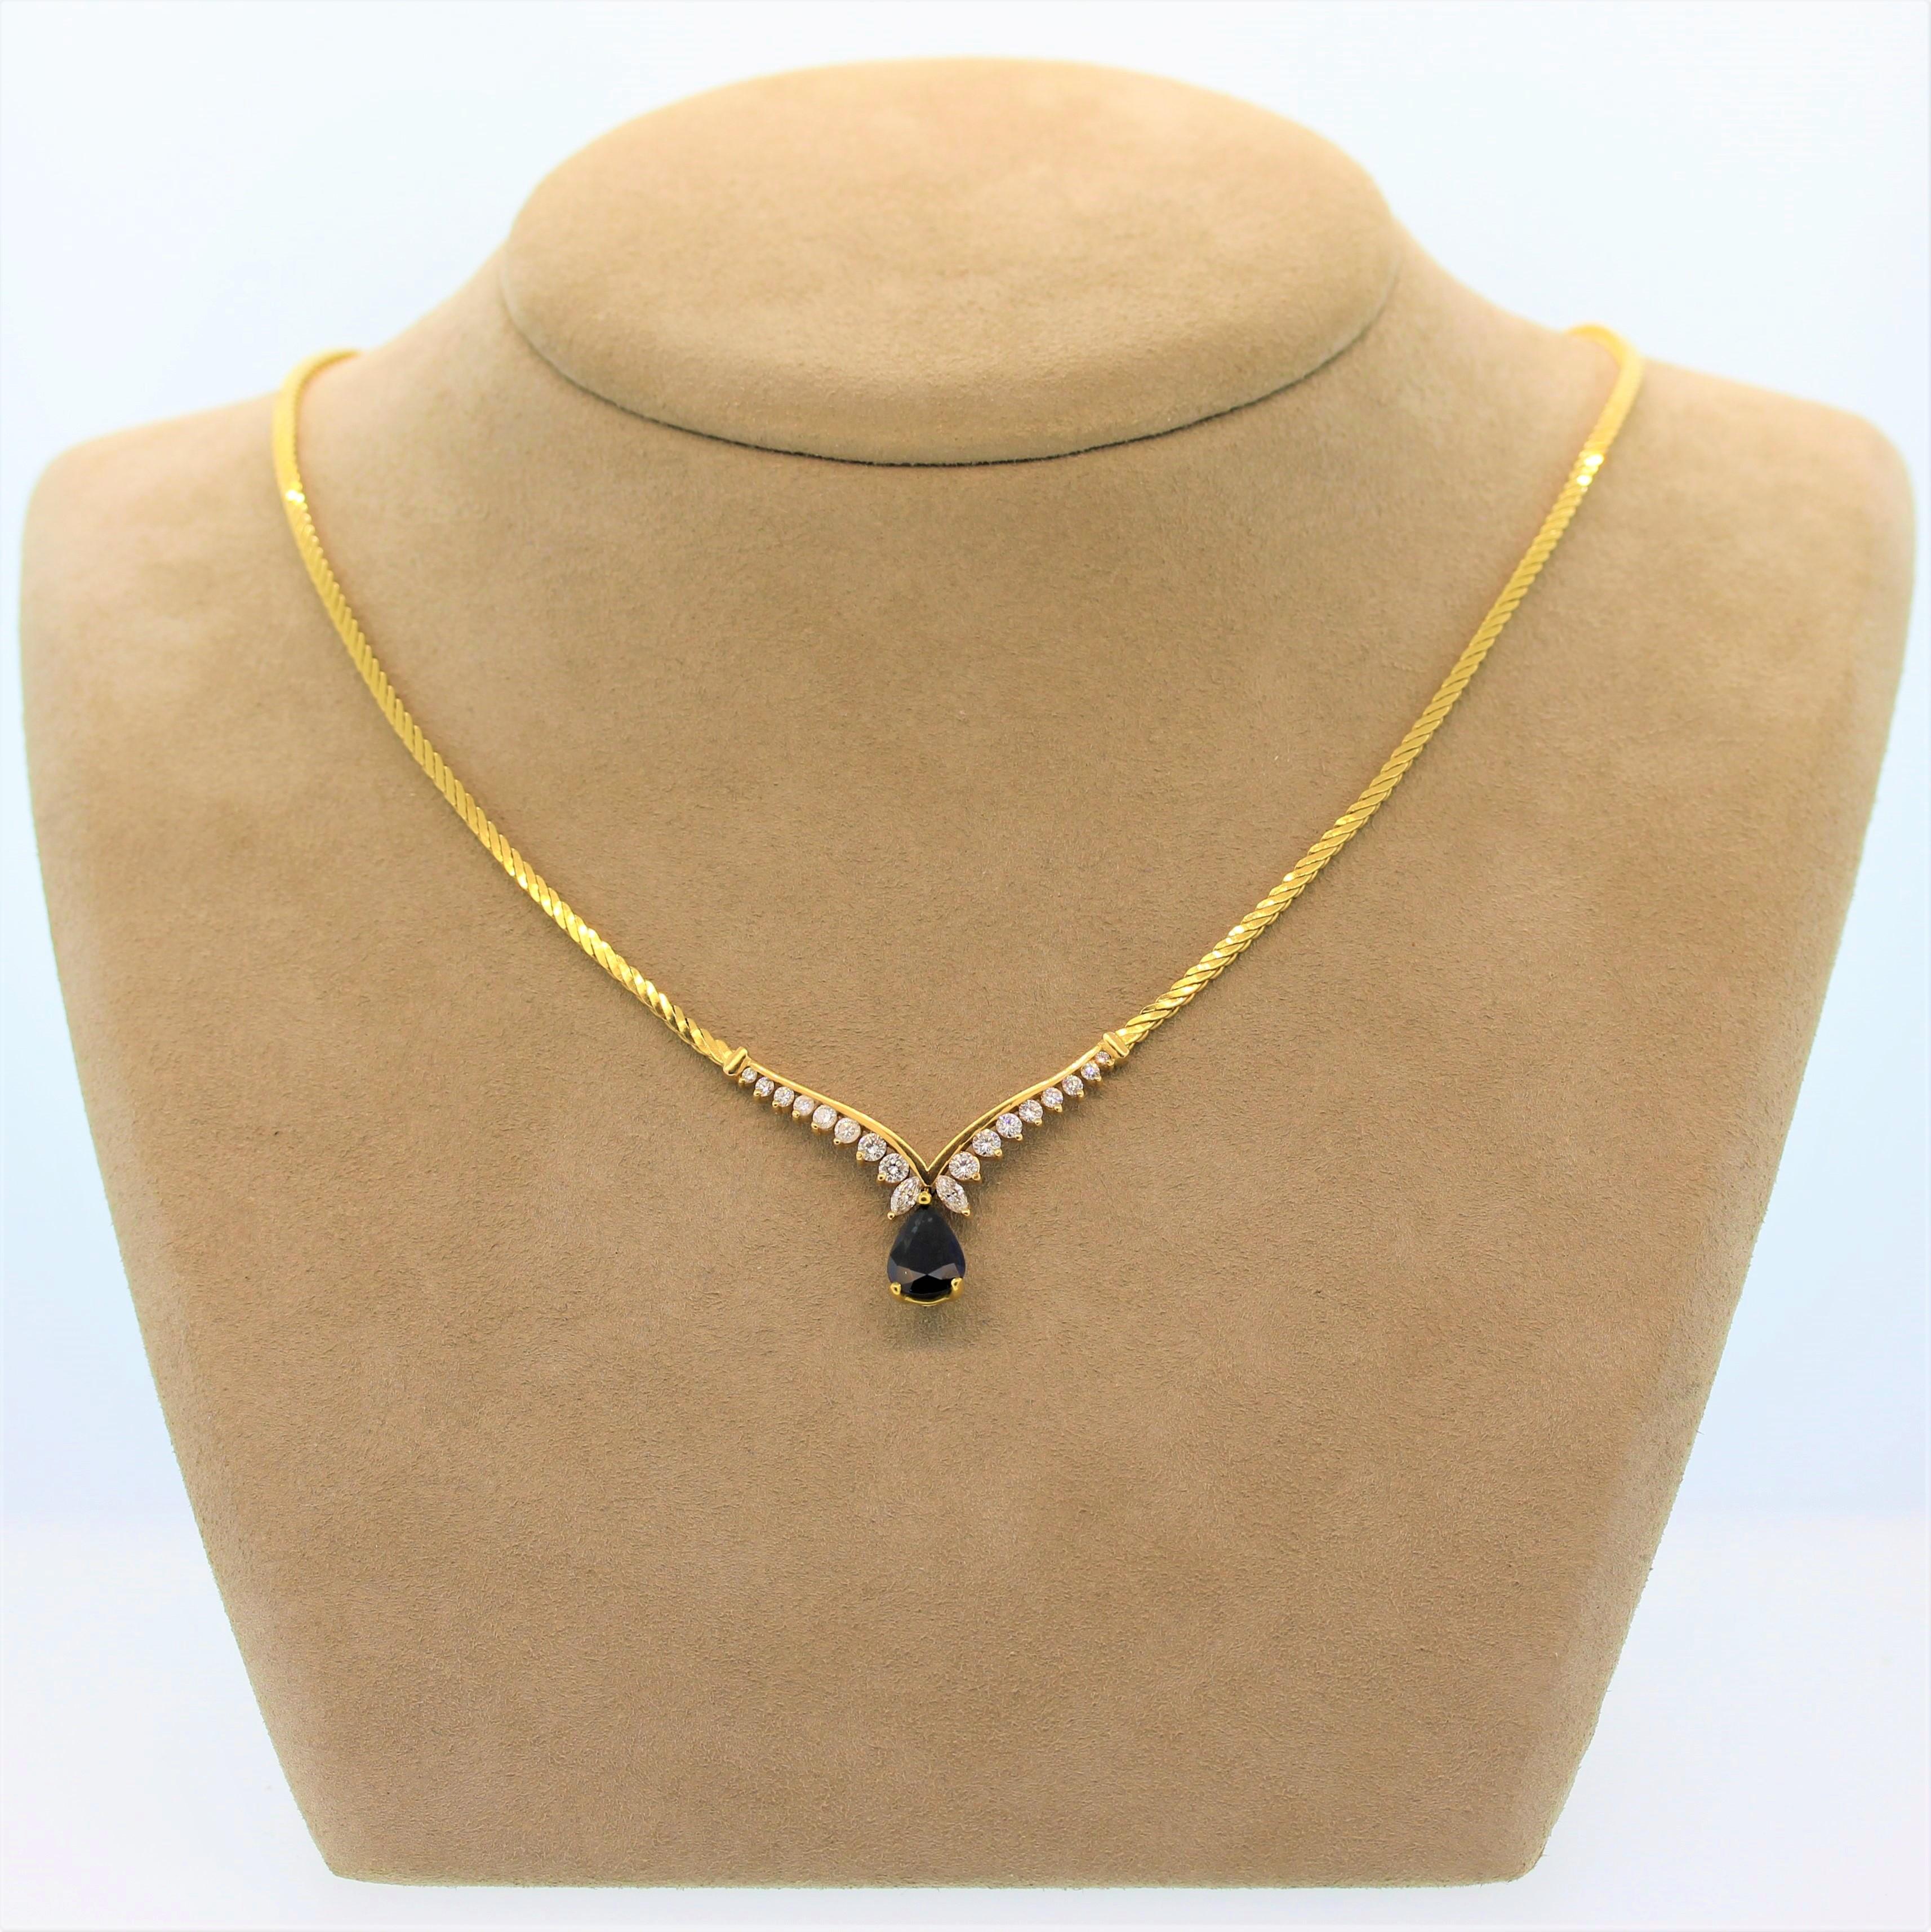 This timelessly elegant necklace features a blue sapphire of approximately 1.50 carats. The pear shape sapphire drops from a 14K yellow gold setting with 1.04 carats of marquise and round cut diamonds in a graduating pattern. The chain is a twist